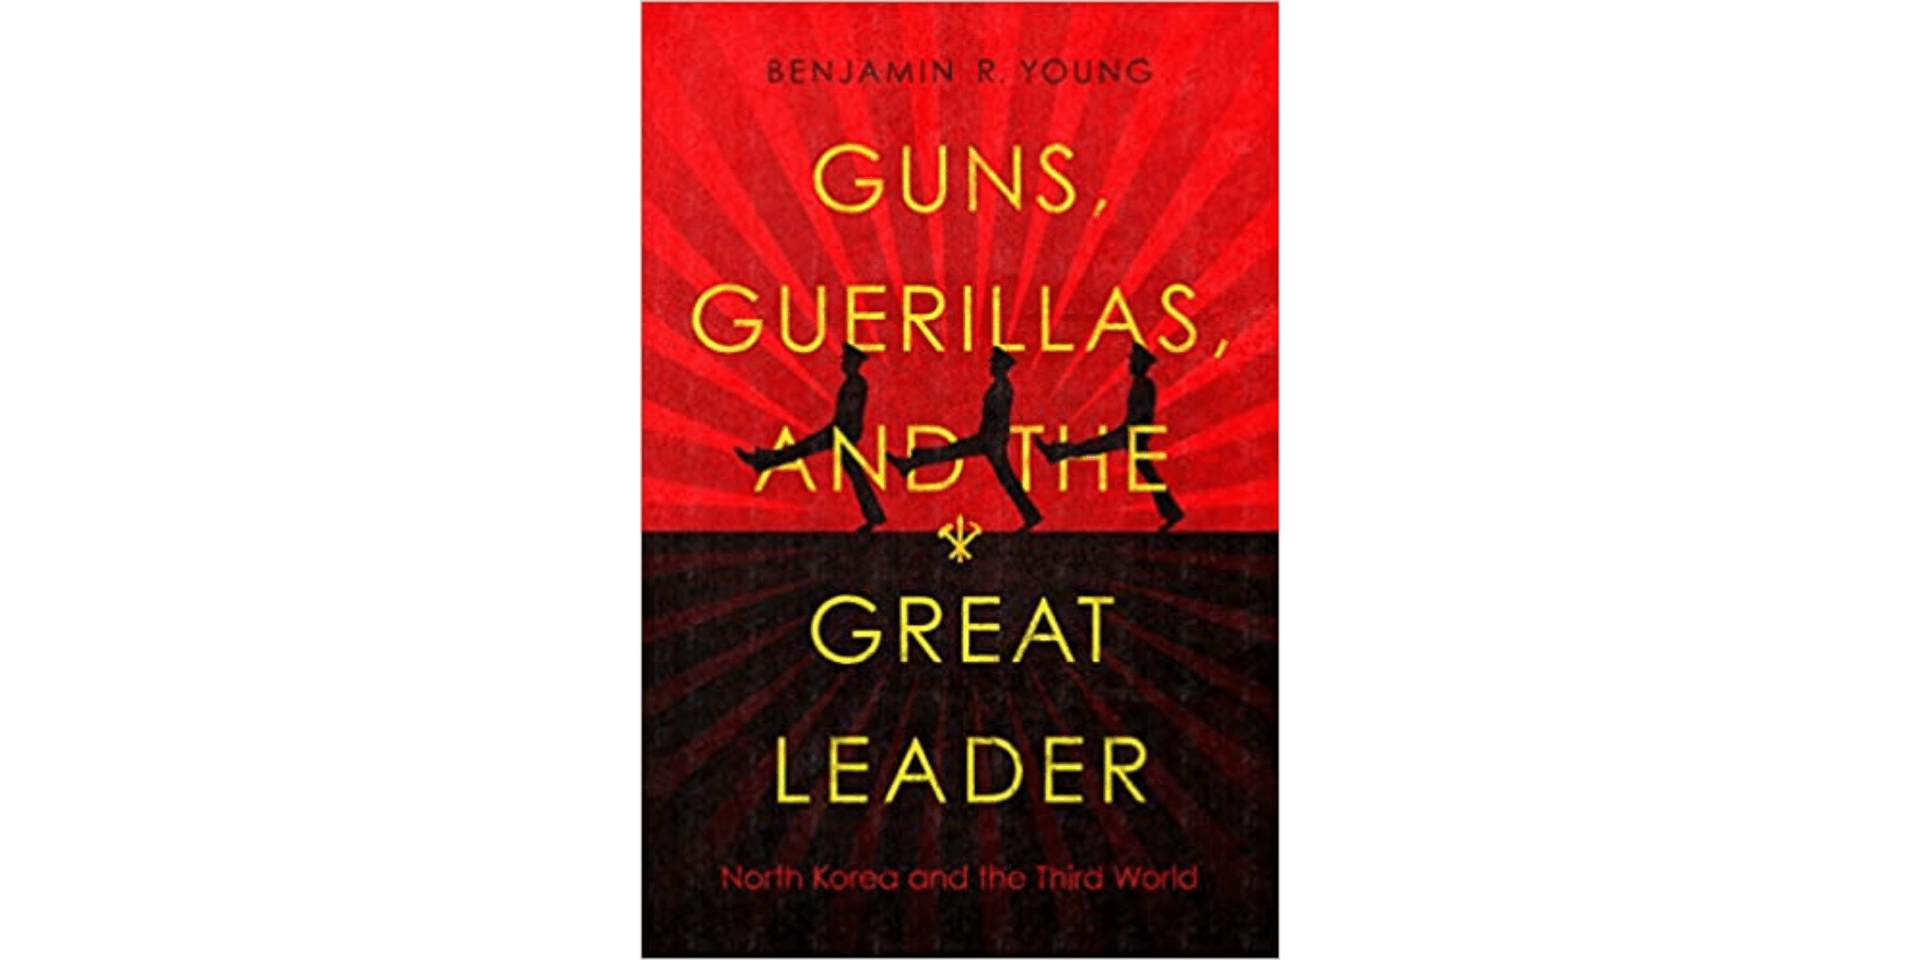 book cover of guns, guerillas, and the great leader on a white background